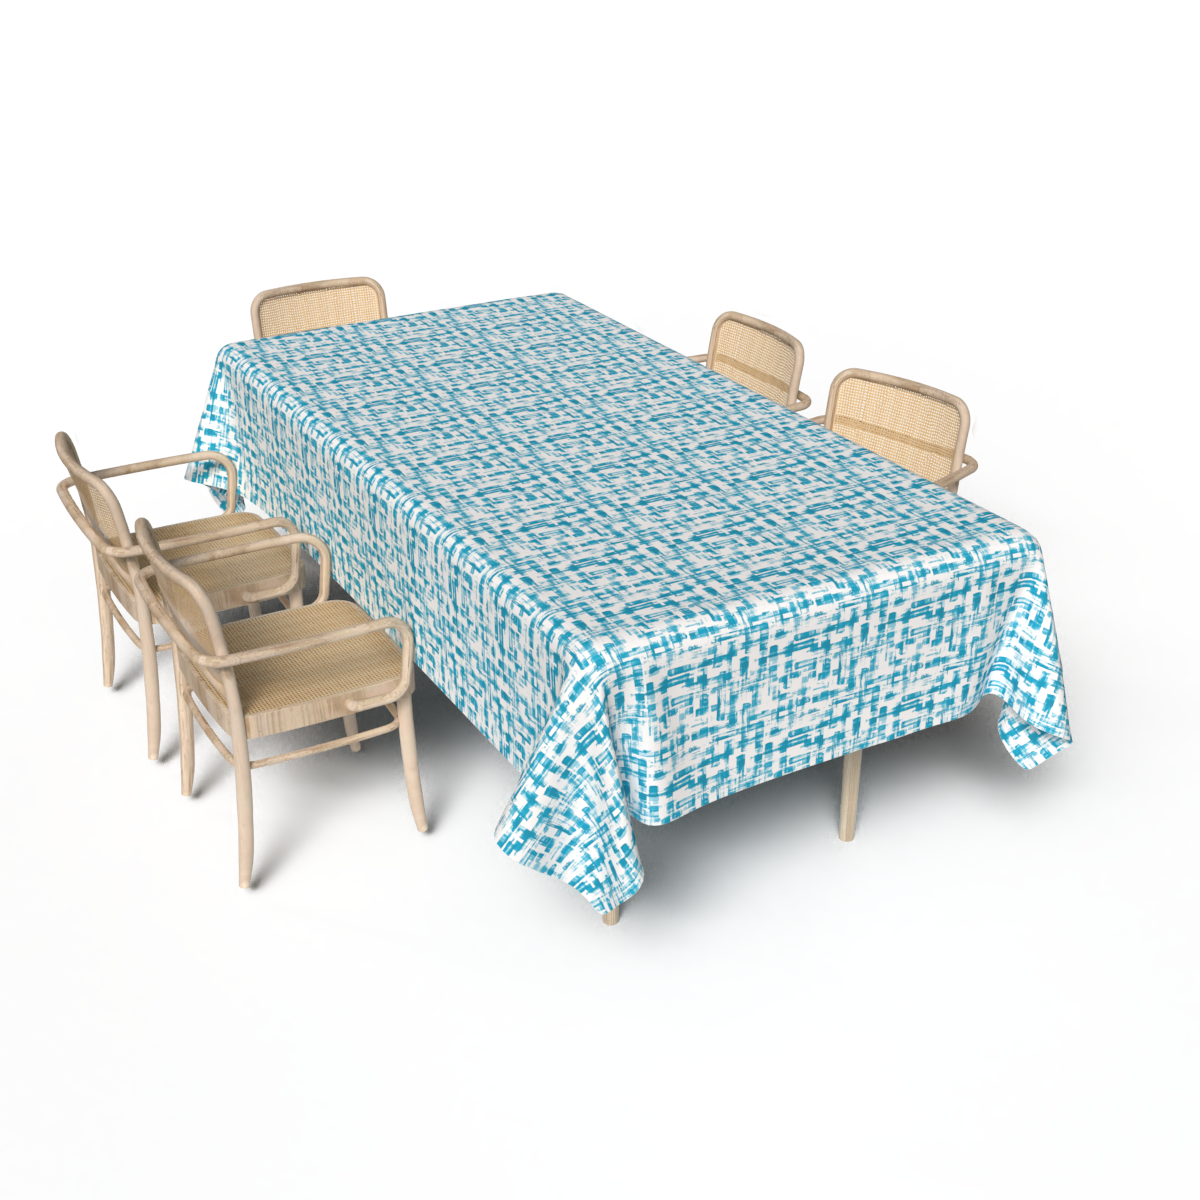 Table cloth - multiple sizes - ROM573